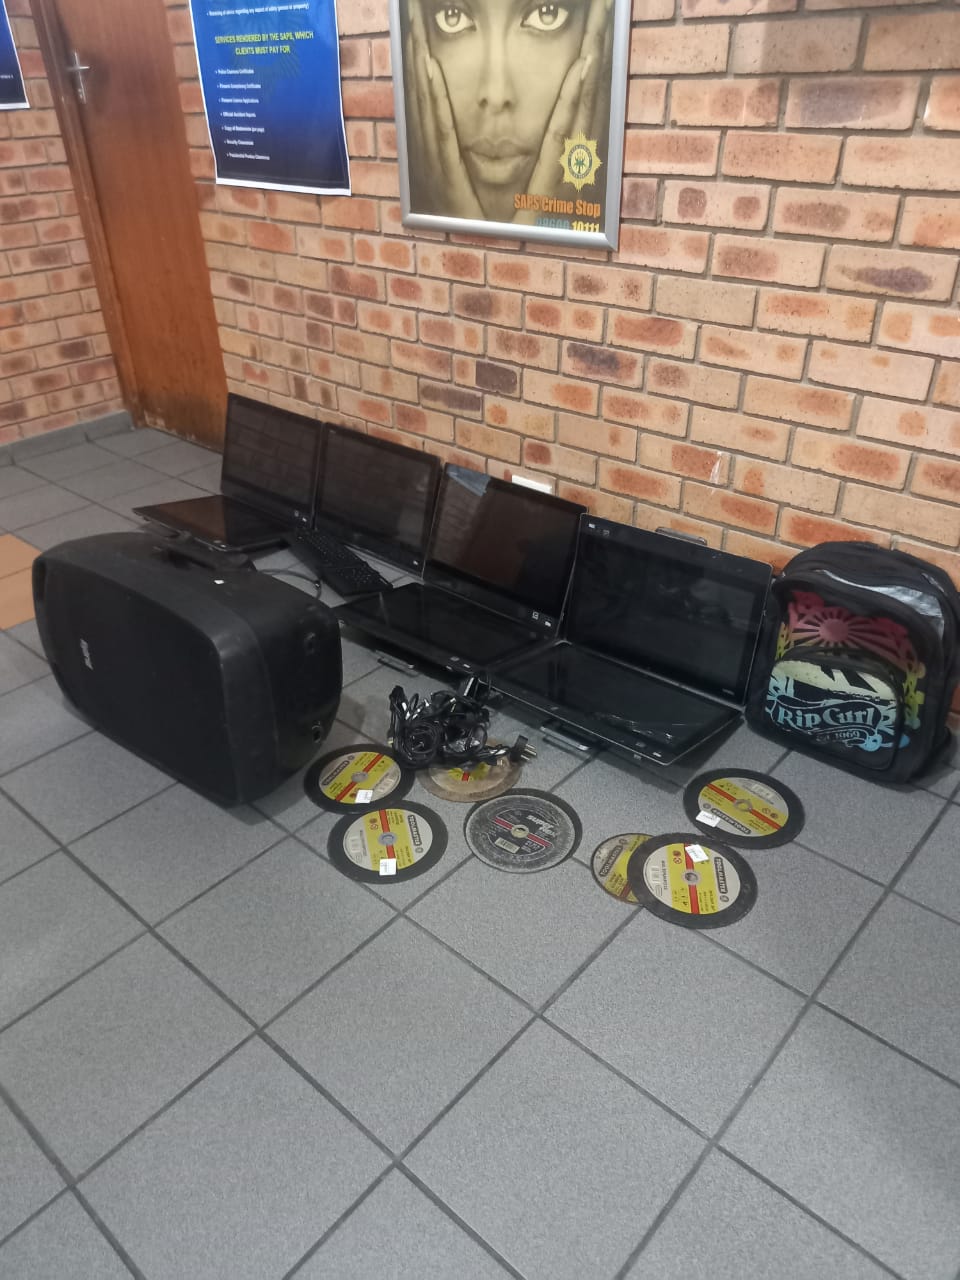 Suspect bust with stolen government property